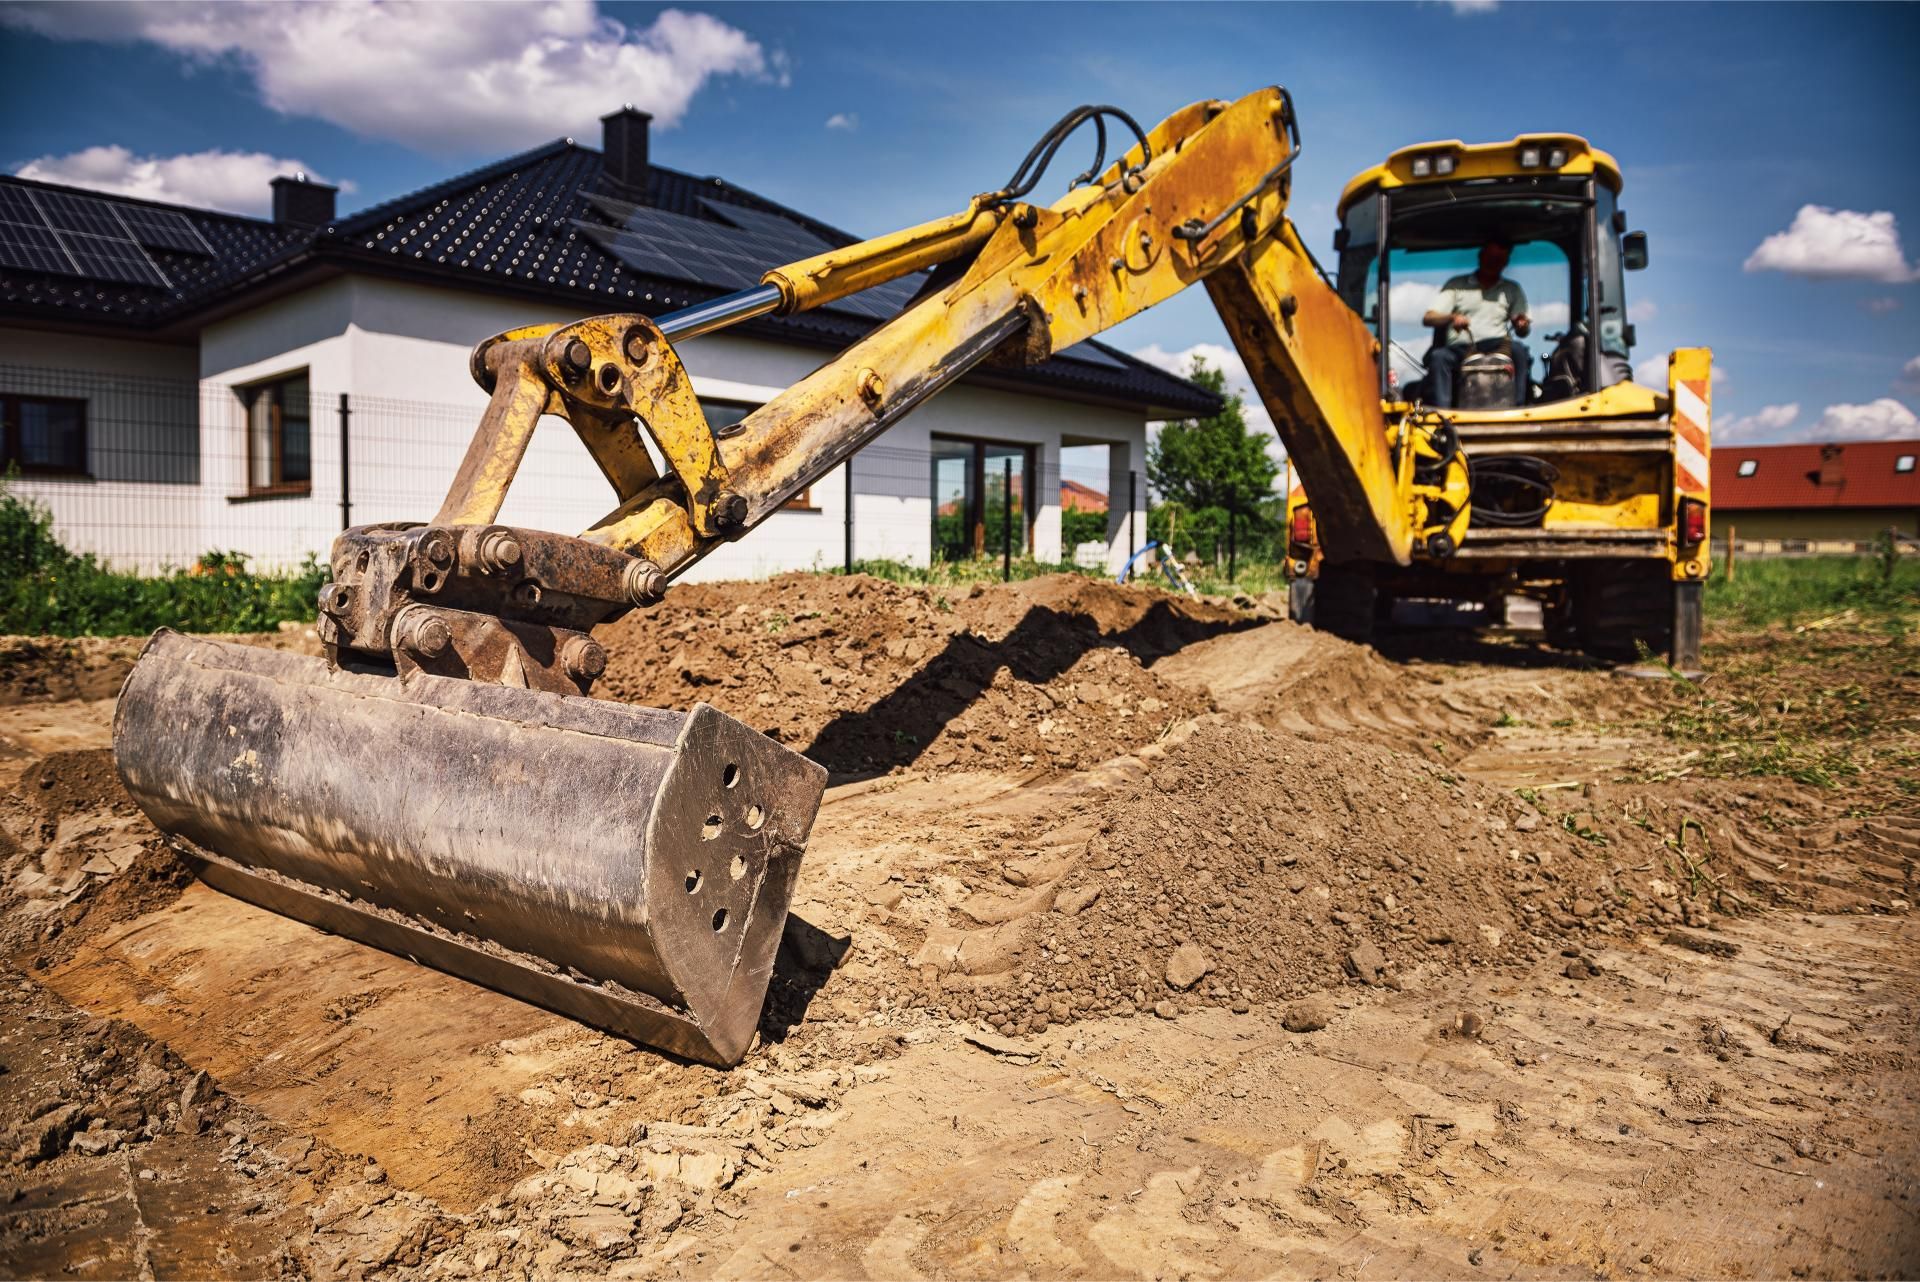 a yellow excavator is digging dirt in front of a house